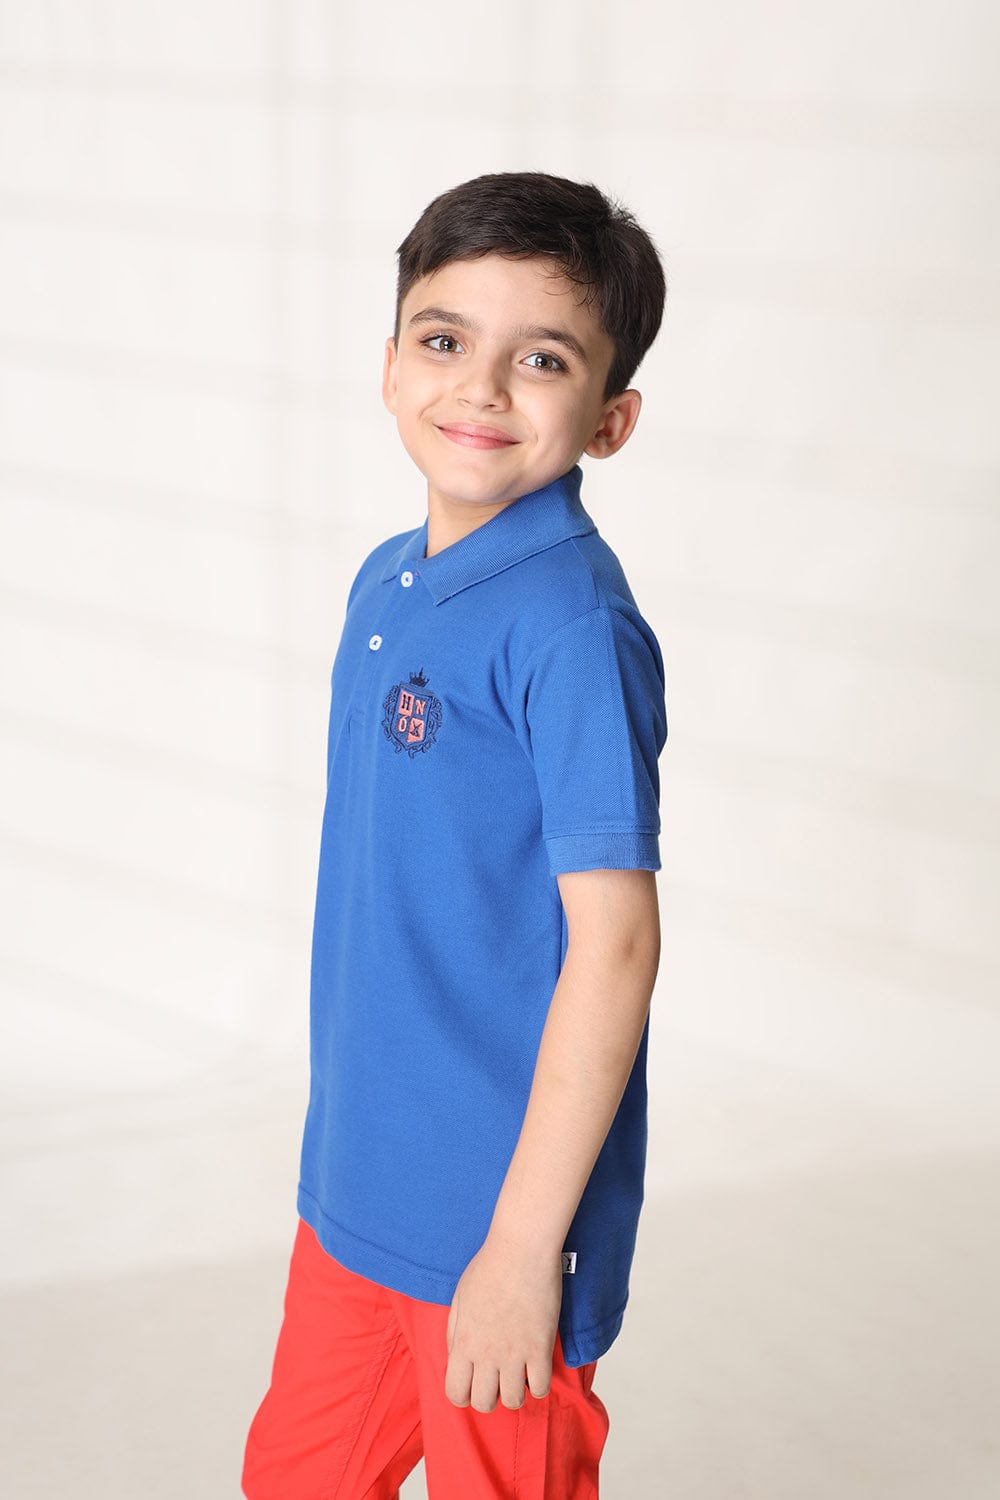 Hope Not Out by Shahid Afridi Boys Knit Polo Shirt Blue Polo With Embroidered Logo